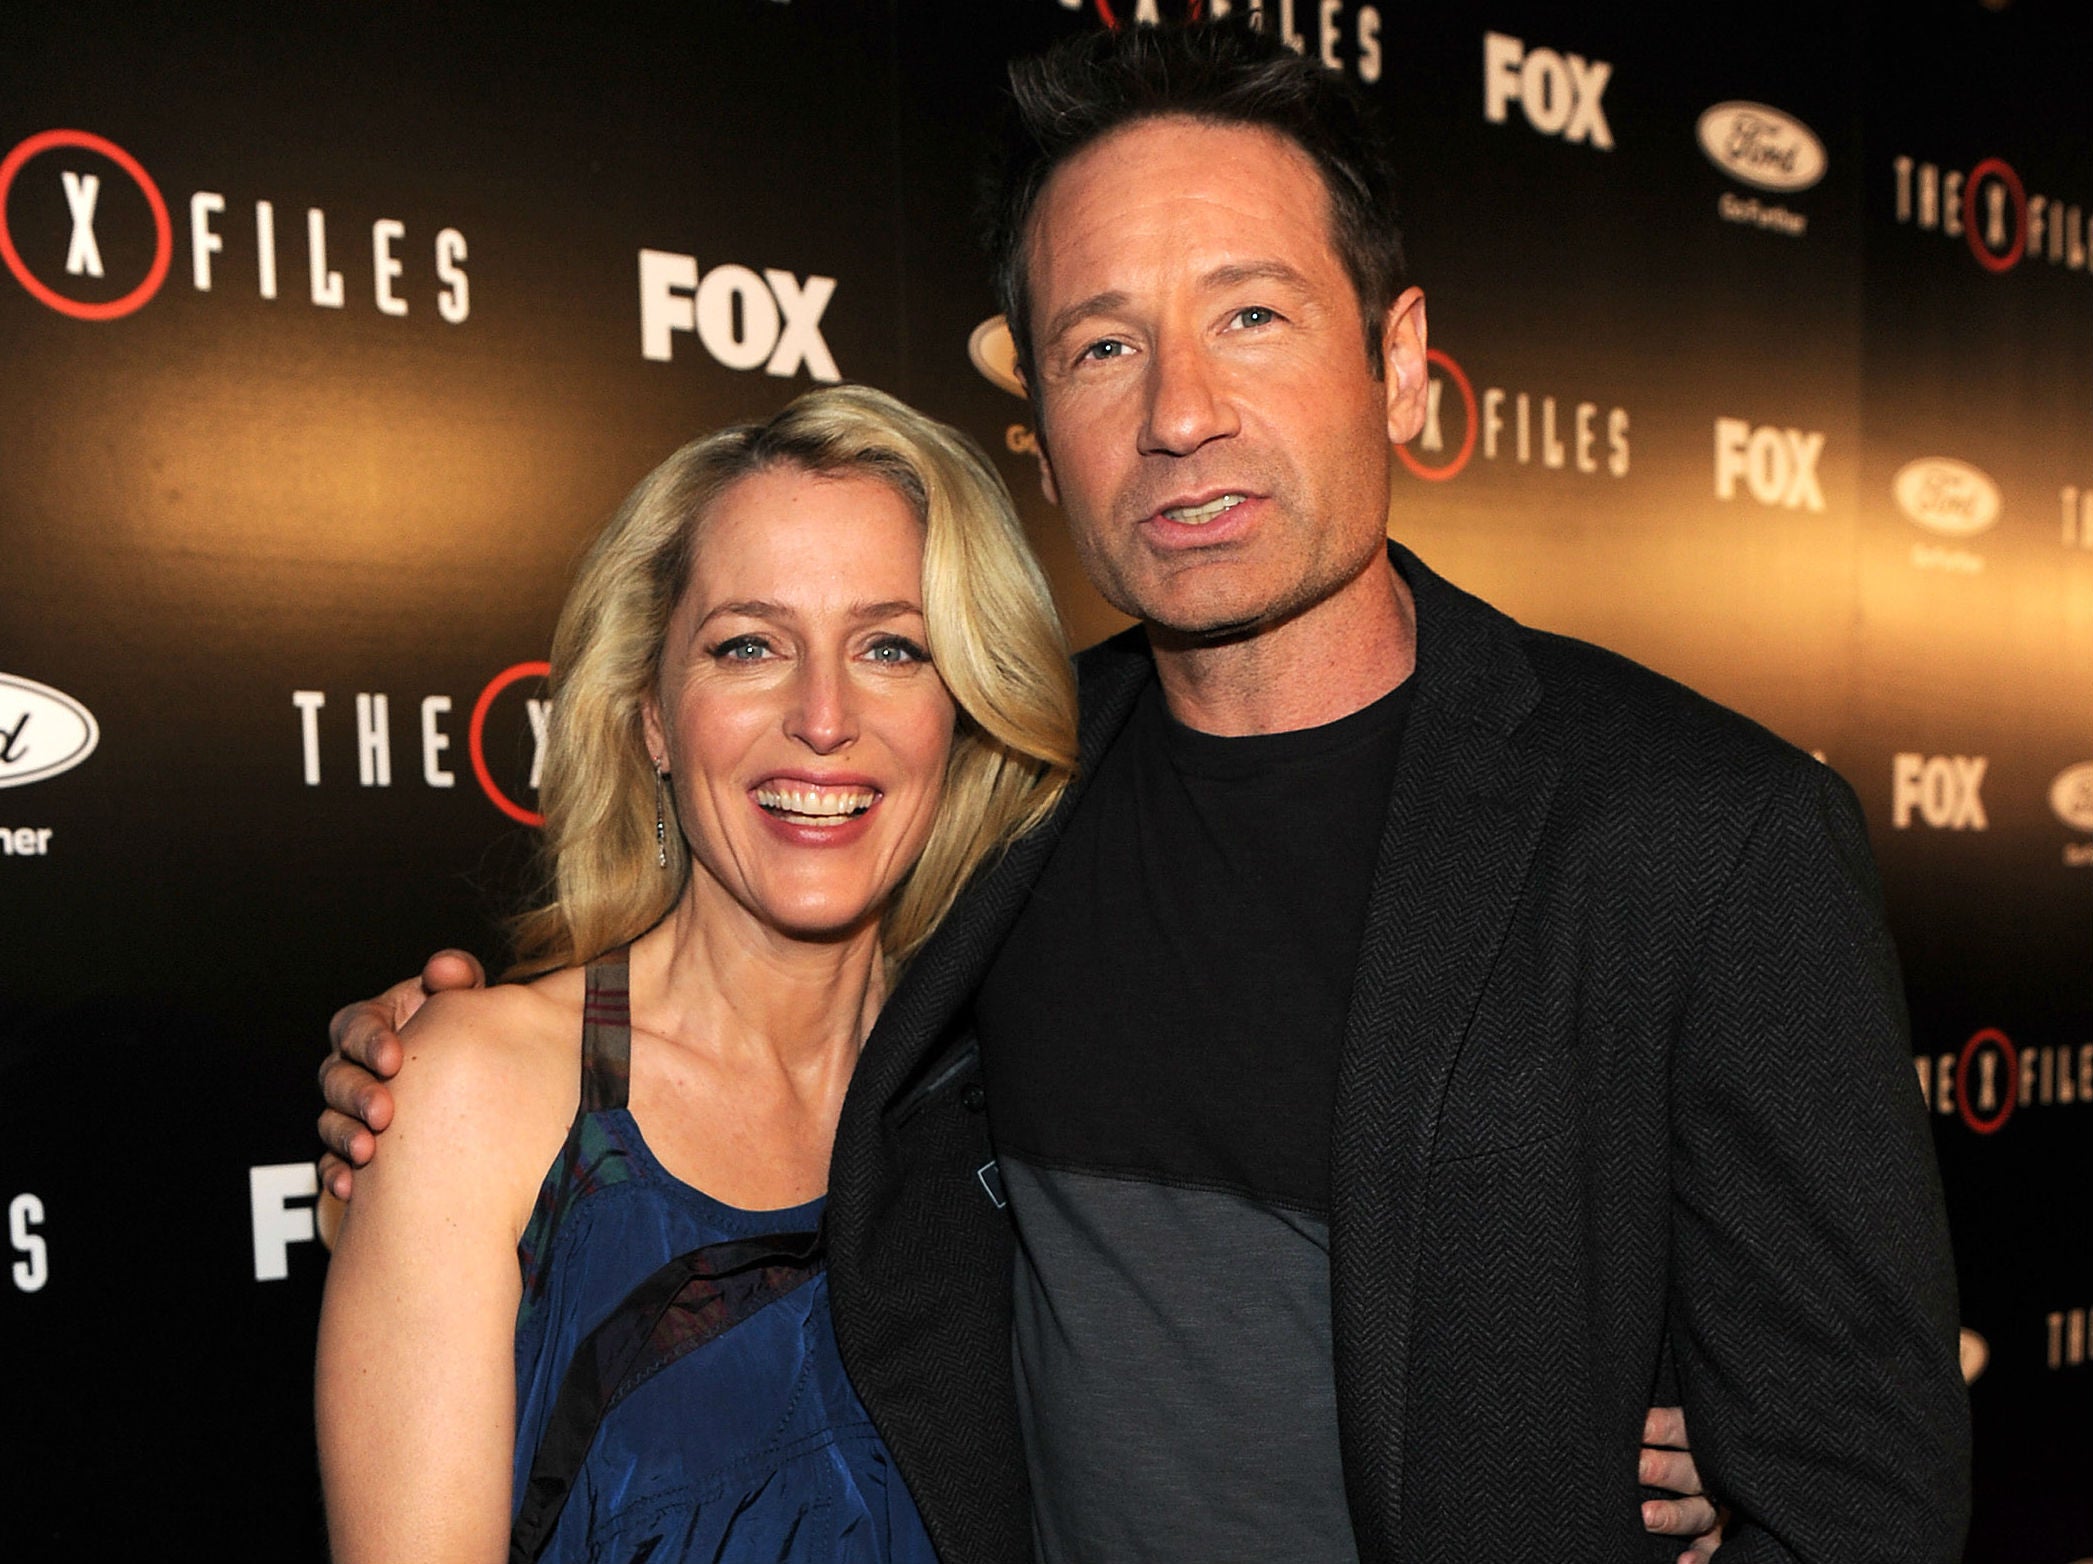 Gillian Anderson said she was first offered half the pay of co-star David Duchovny